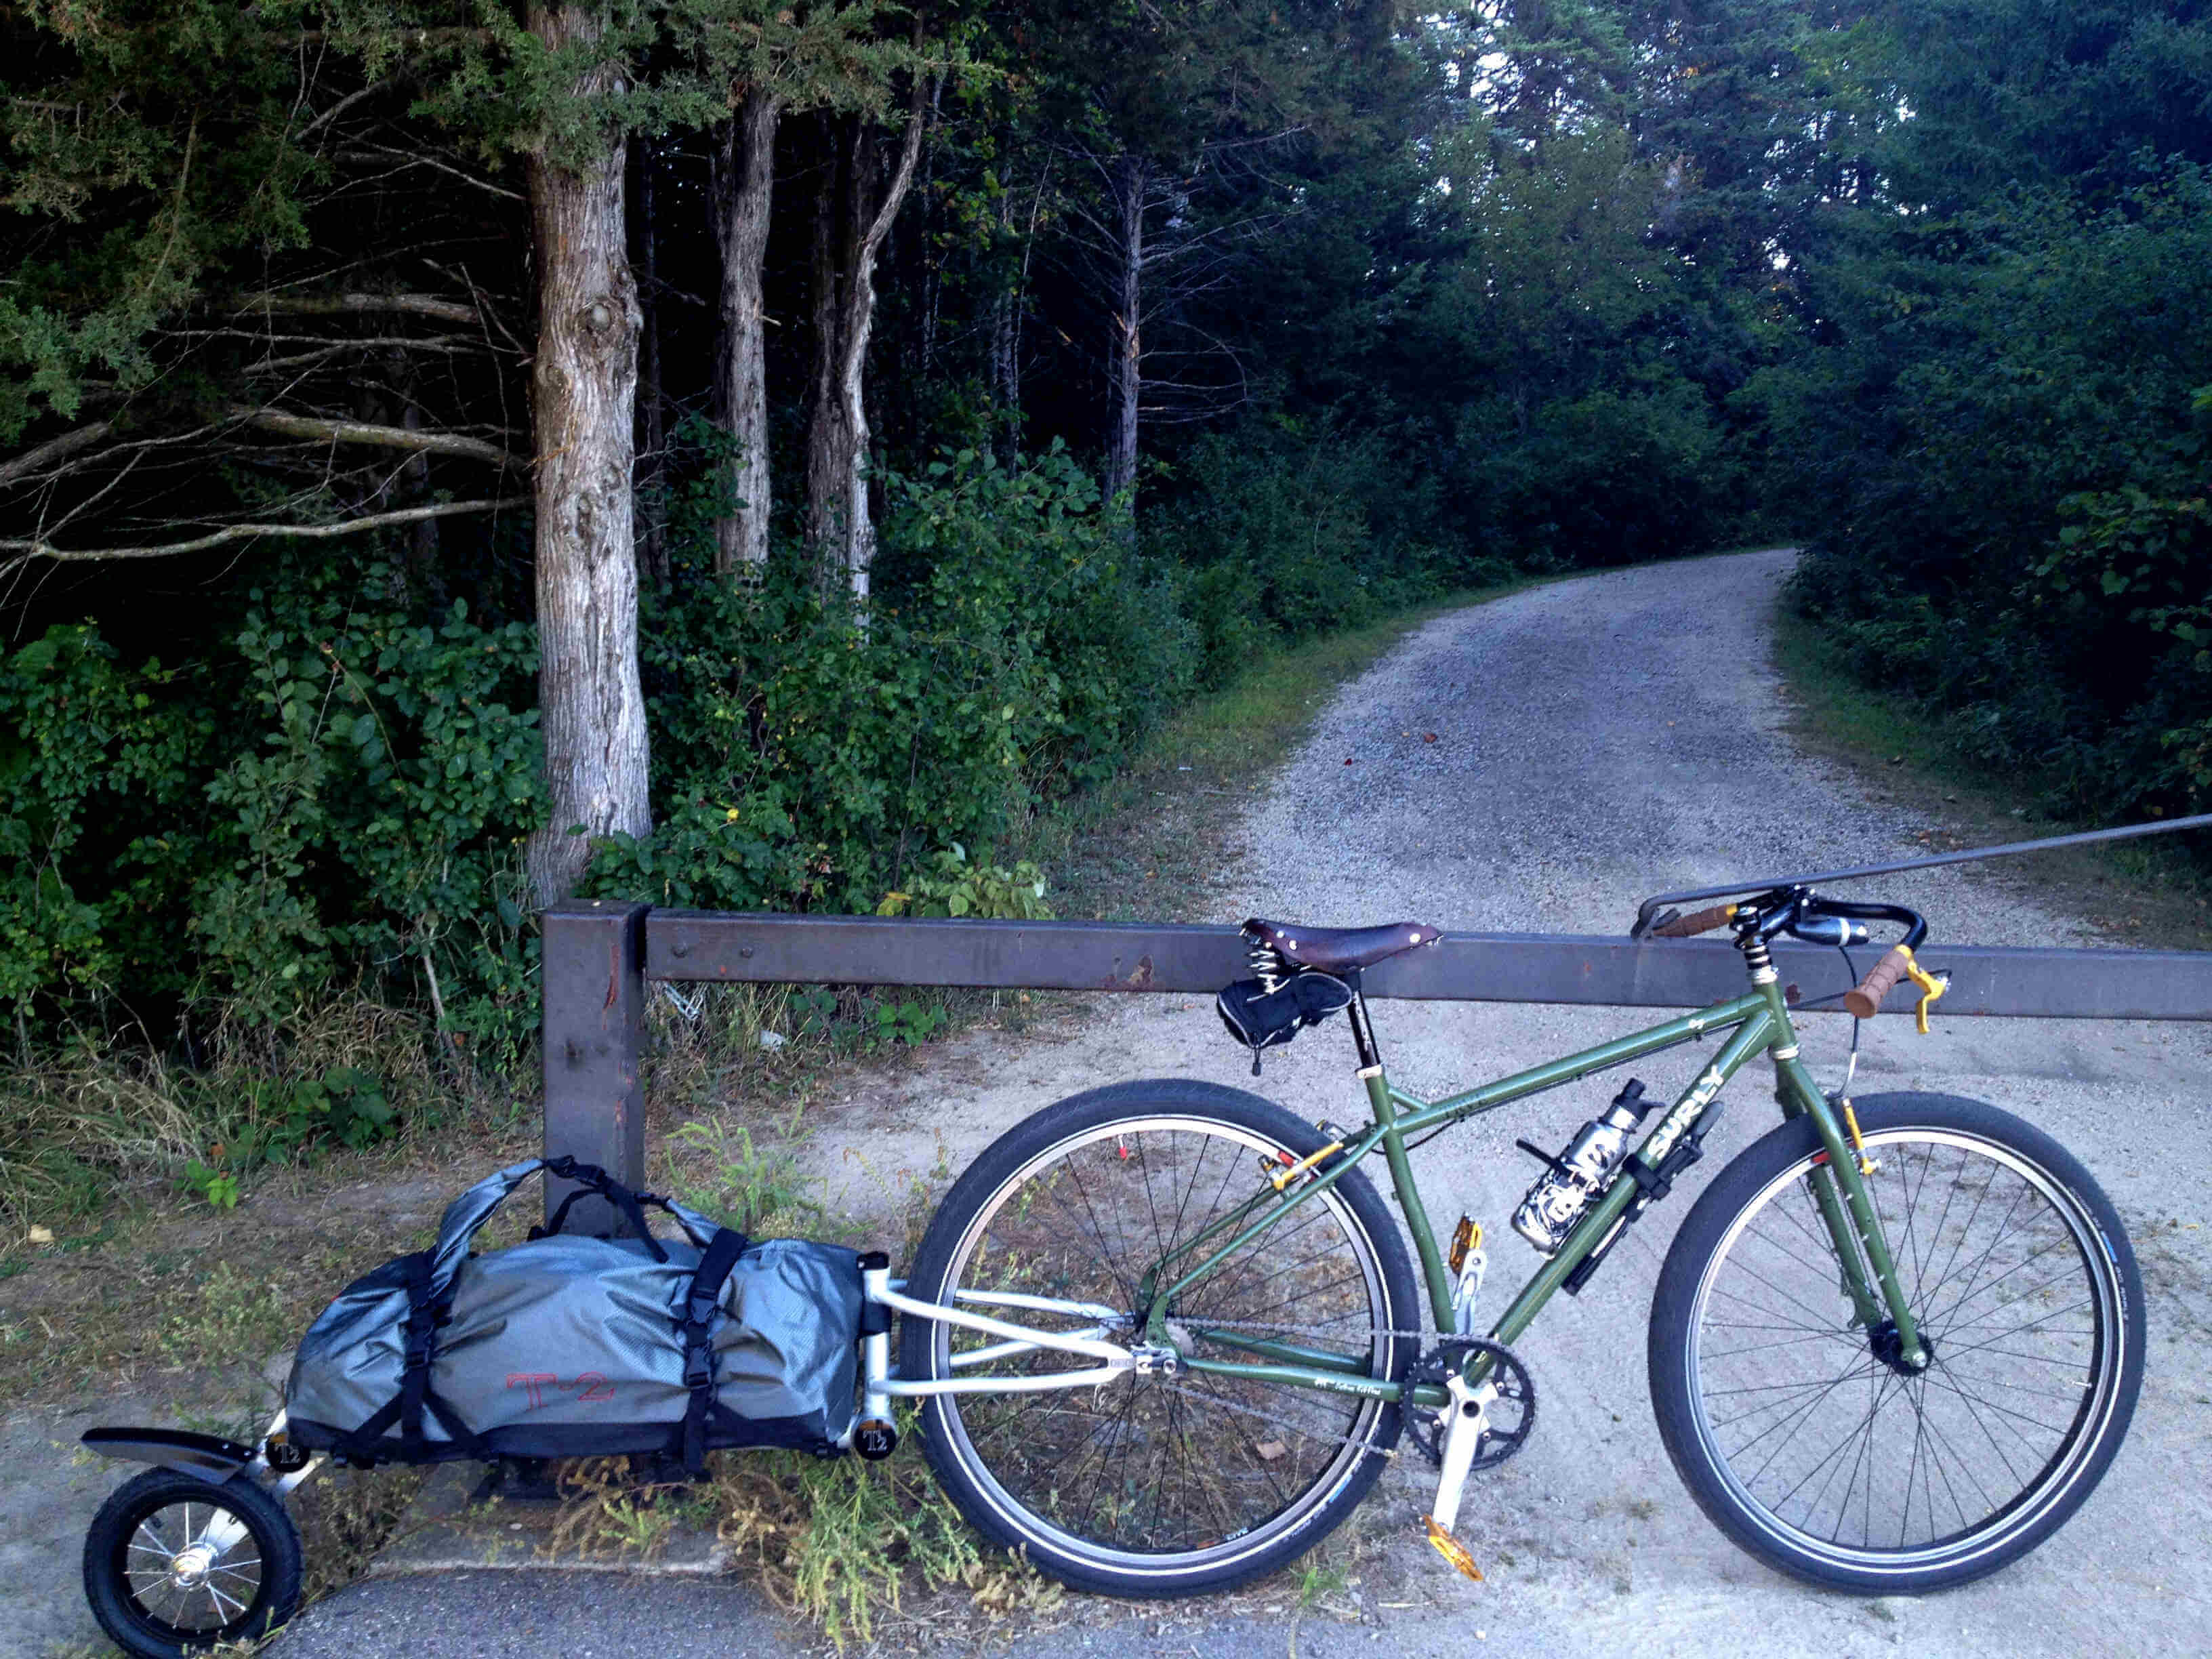 Right side view of a green Surly Ogre bike with foldable trailer, leaning on a gate with a gravel road behind it